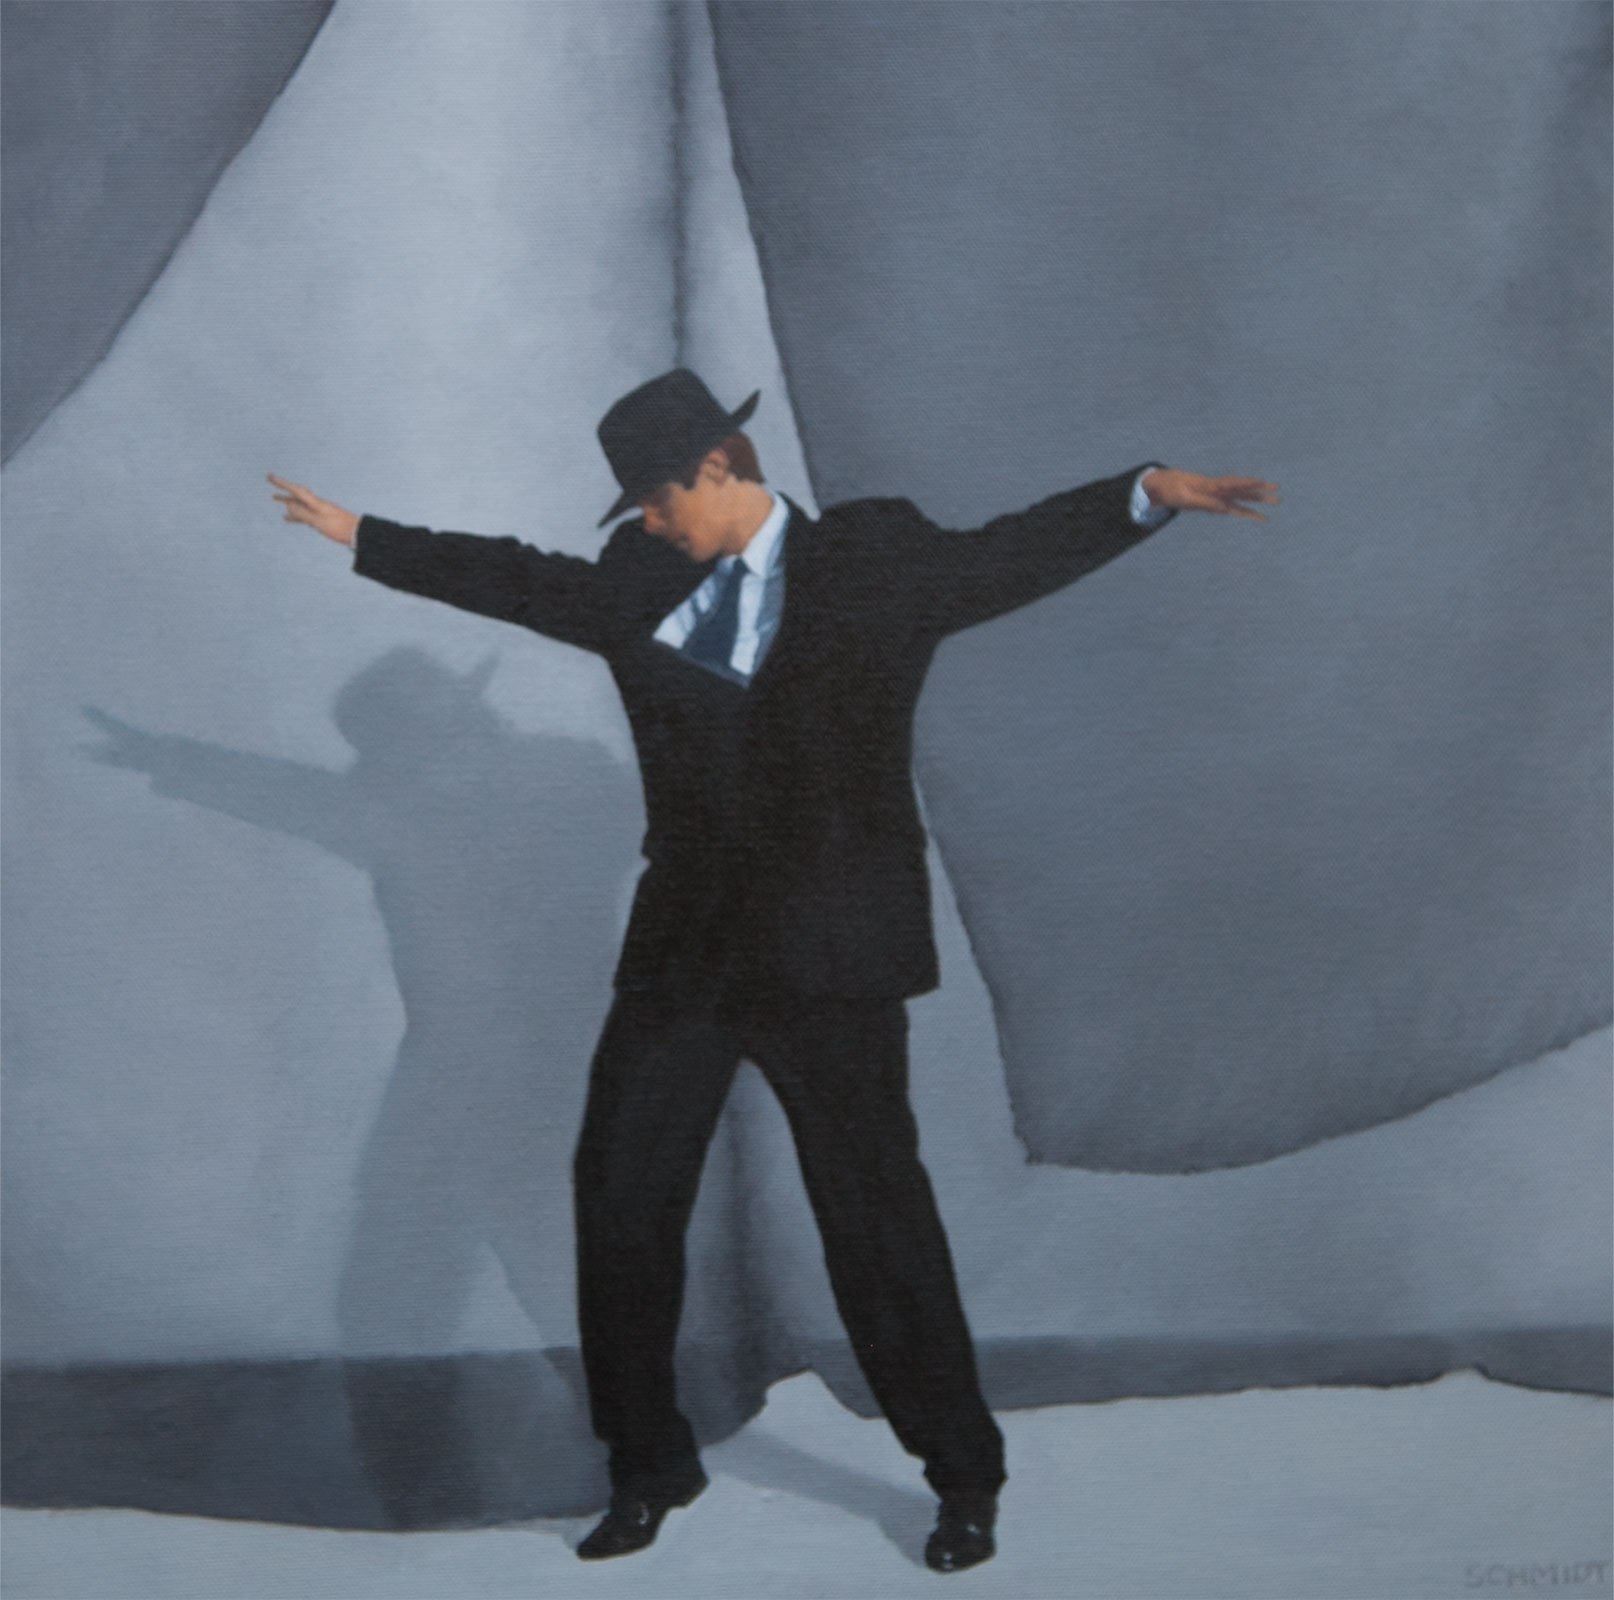 Man Dancing wearing fedora hat and suit